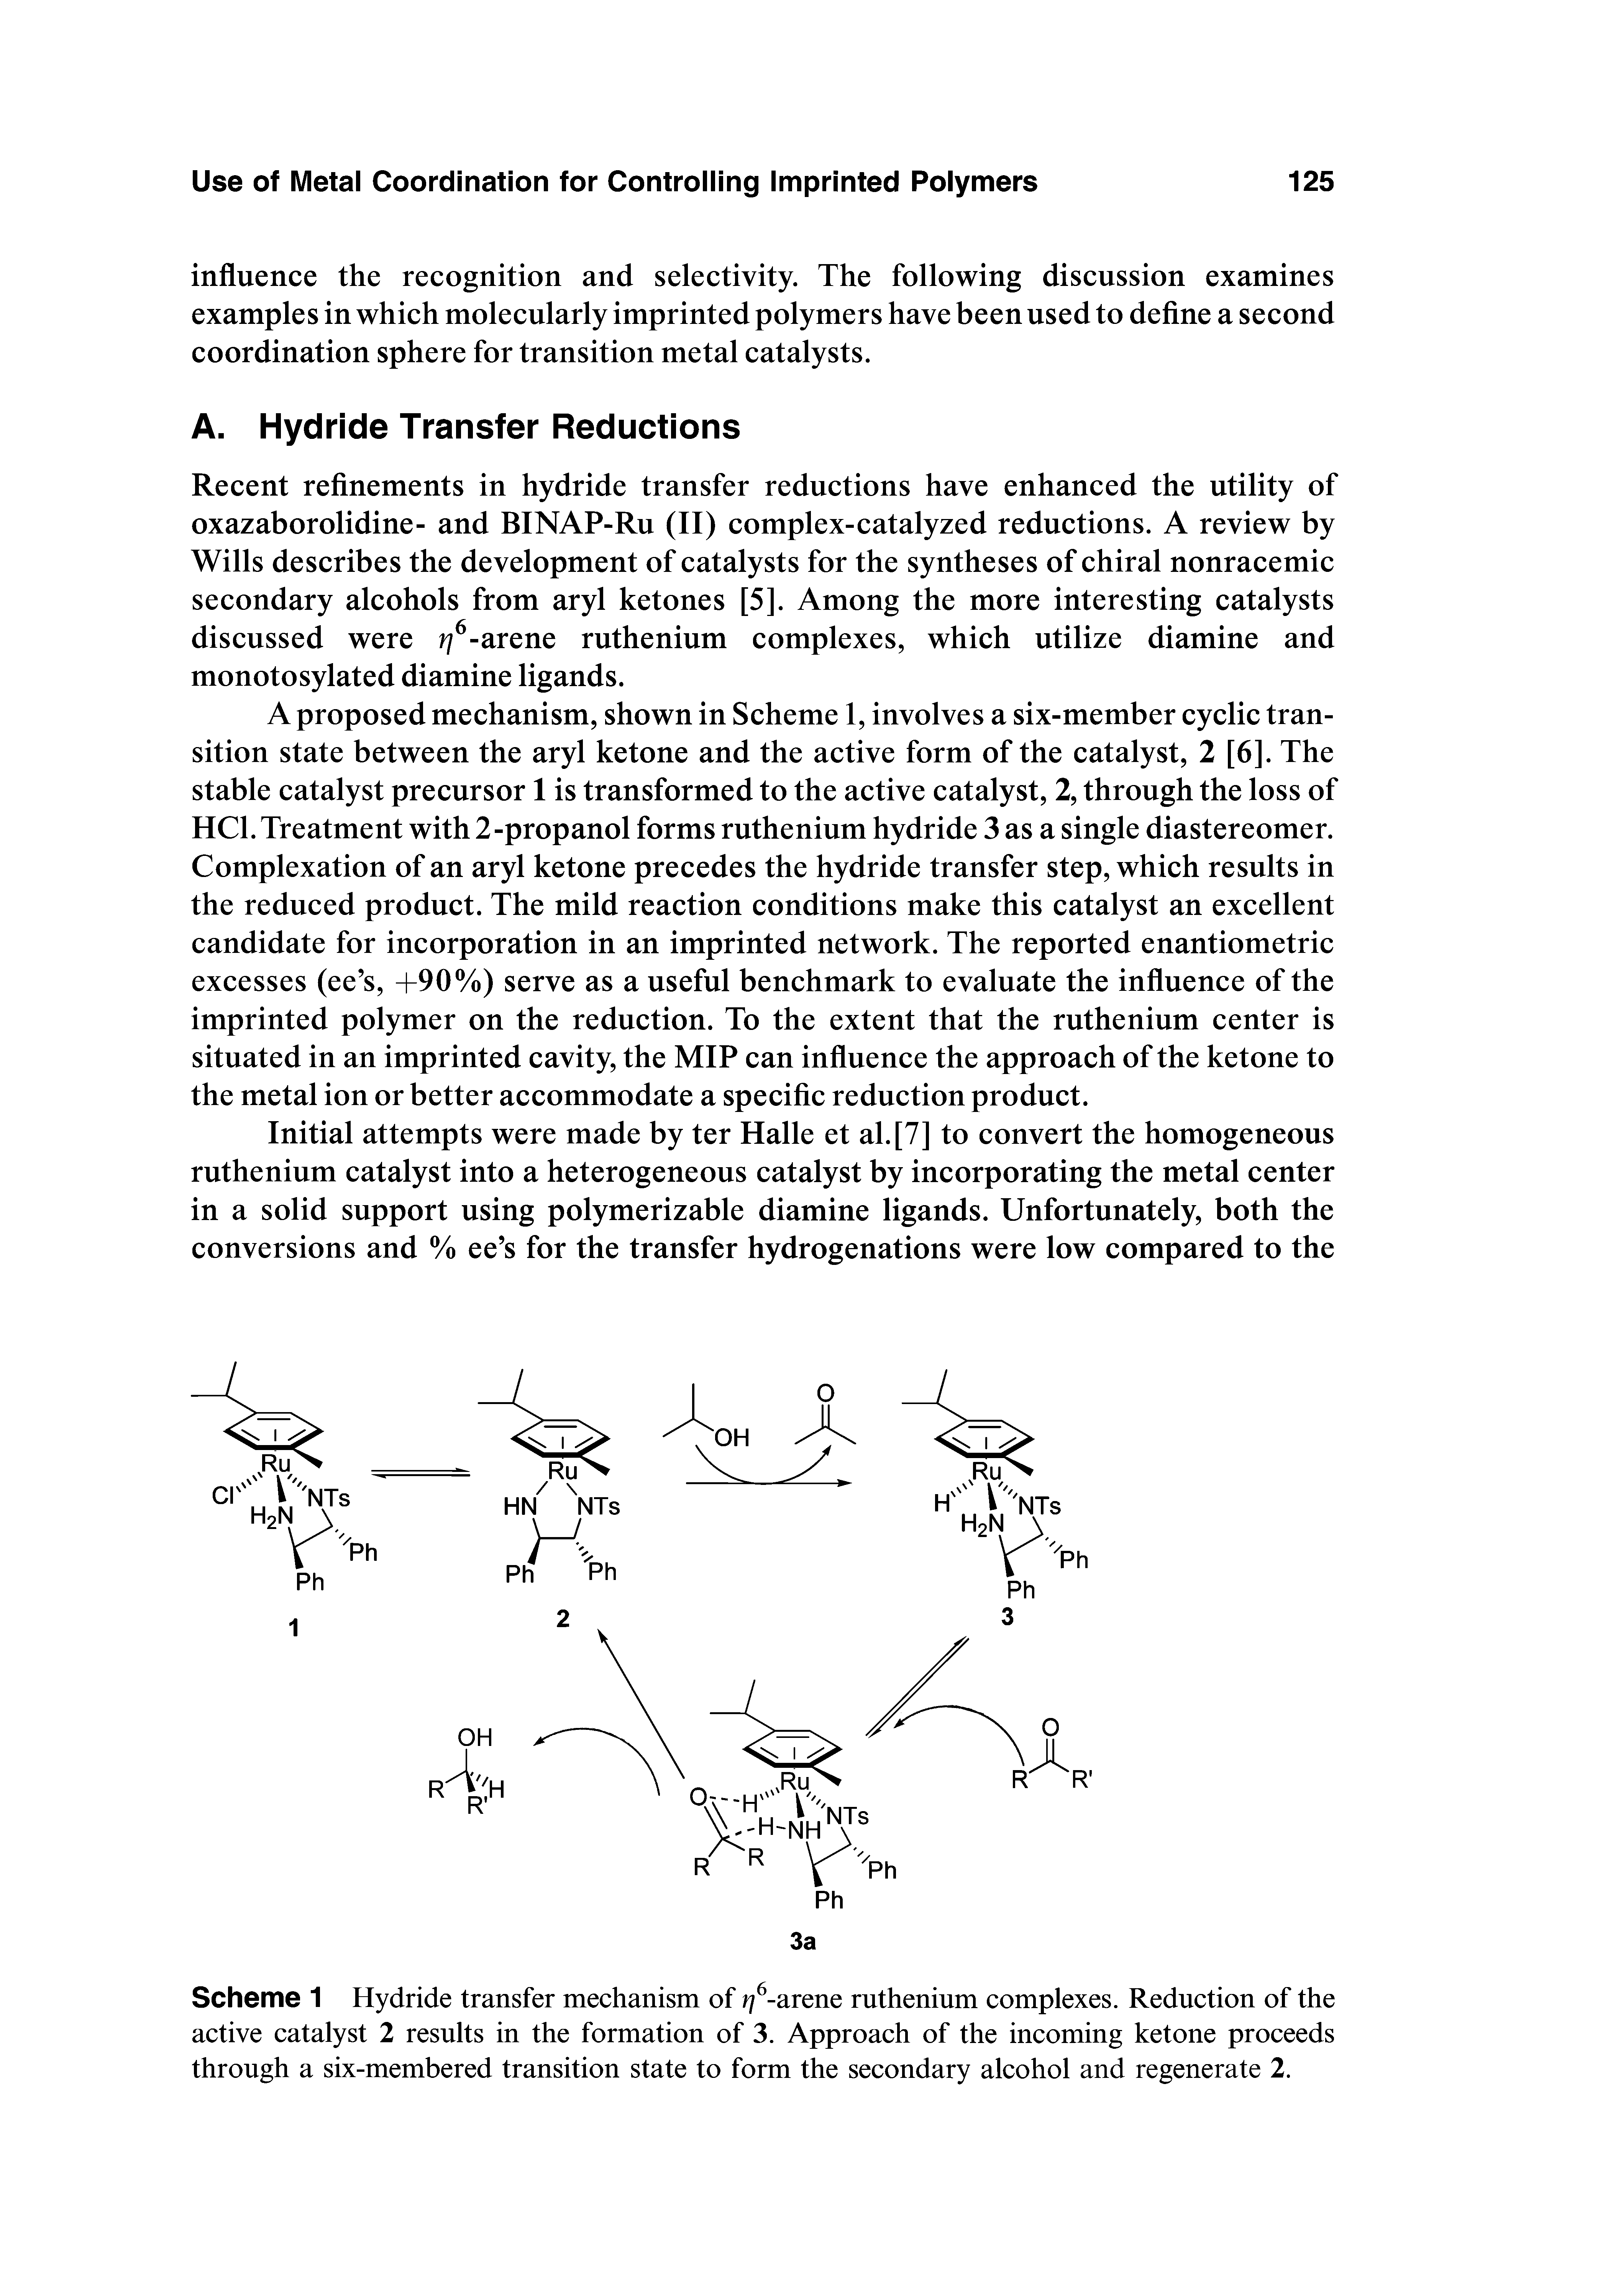 Scheme 1 Hydride transfer mechanism of -arene ruthenium complexes. Reduction of the active catalyst 2 results in the formation of 3. Approach of the incoming ketone proceeds through a six-membered transition state to form the secondary alcohol and regenerate 2.